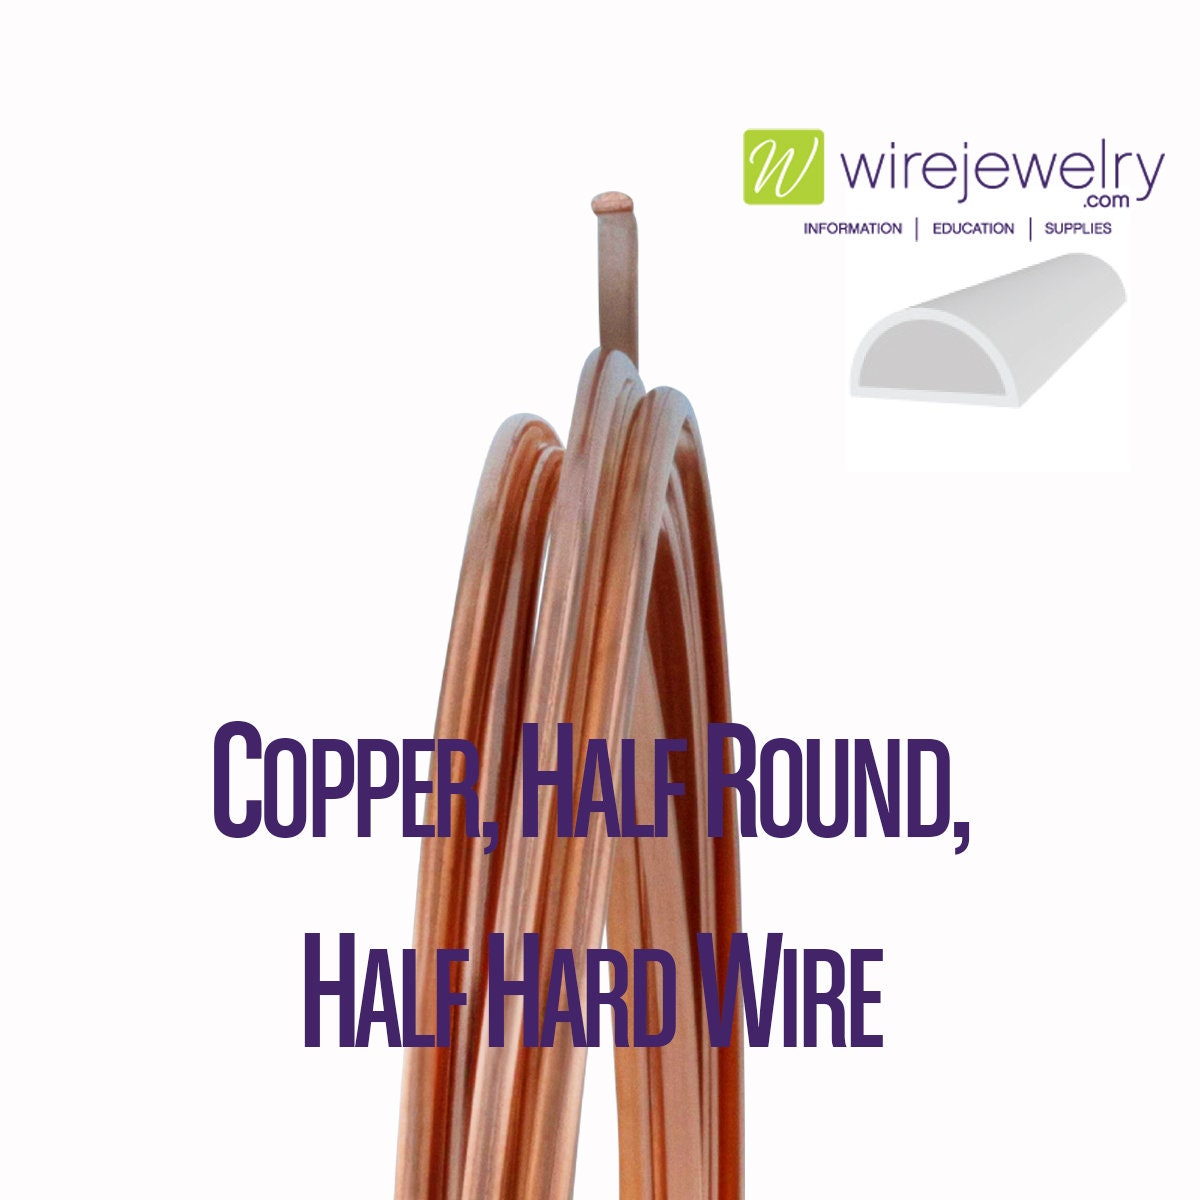 16 Gauge Copper Wire, 1.25mm Wire, Tarnish Resistant, 3 Metre Coil, Copper  Coil, Wire Wrapping, Non Tarnish Wire, Jewelry Wire, UK Seller